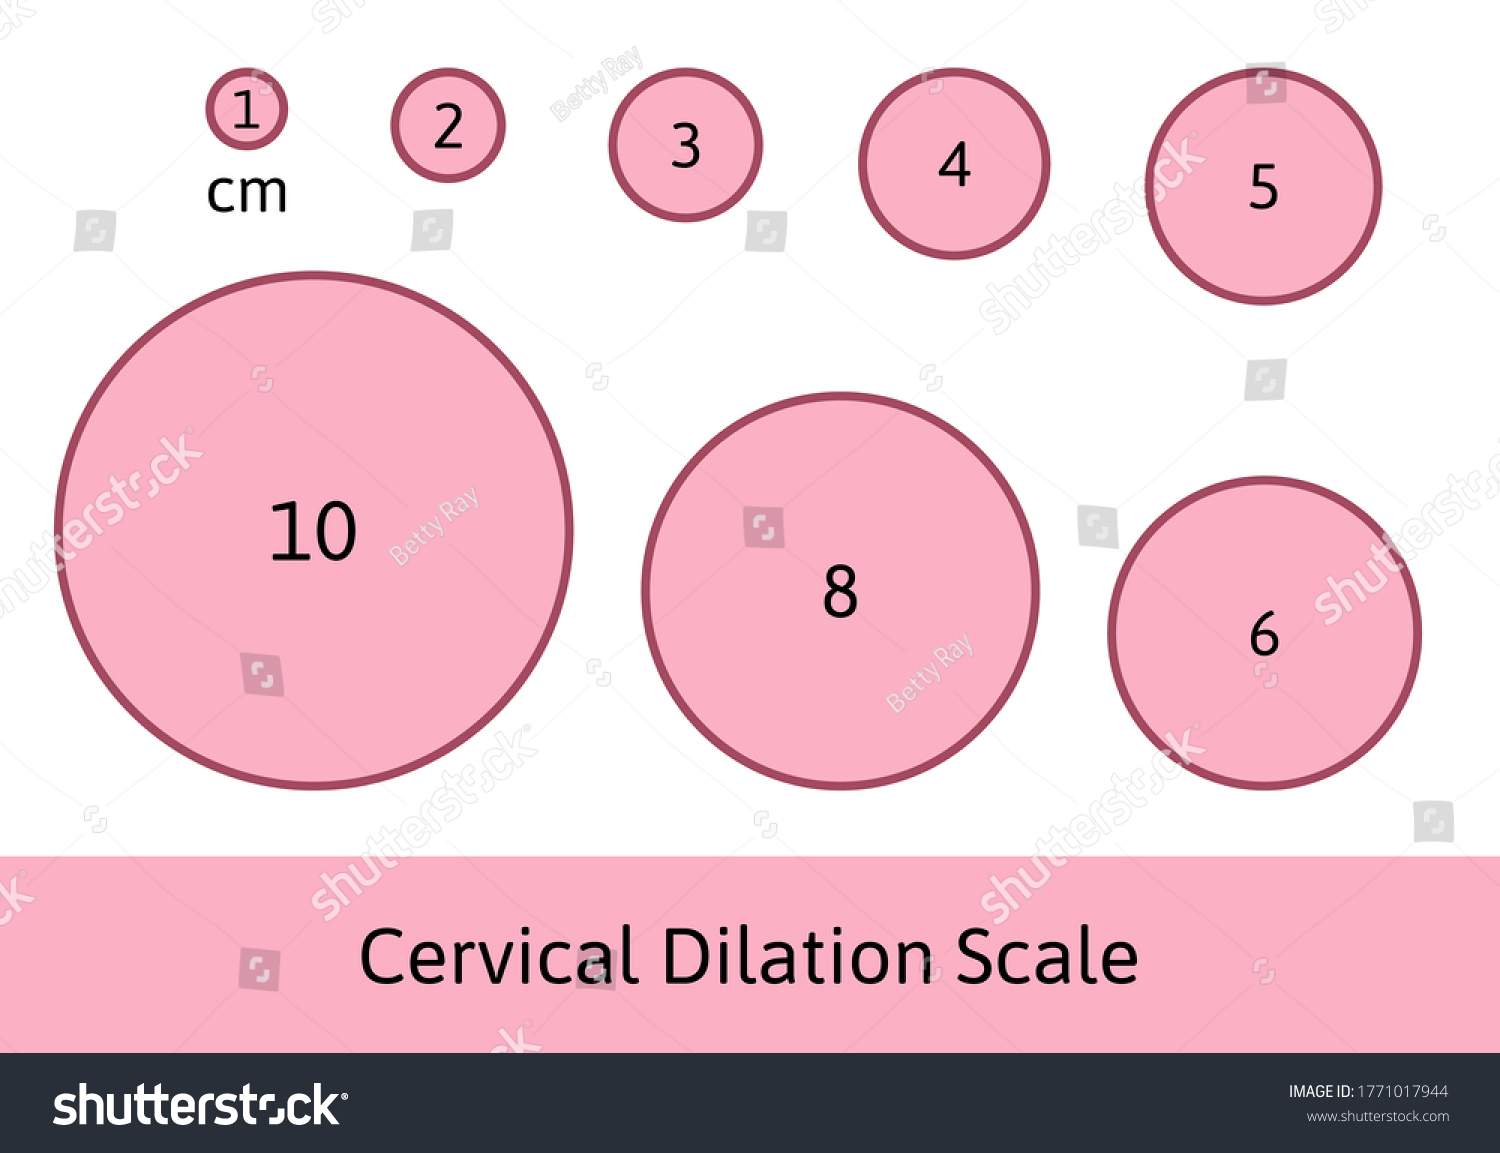 Cervial Dilation Scale with pink circles. Shows how cervix is opening during delivery process. Medical Illustration chart in centimeters. Isolated on white background. #1771017944